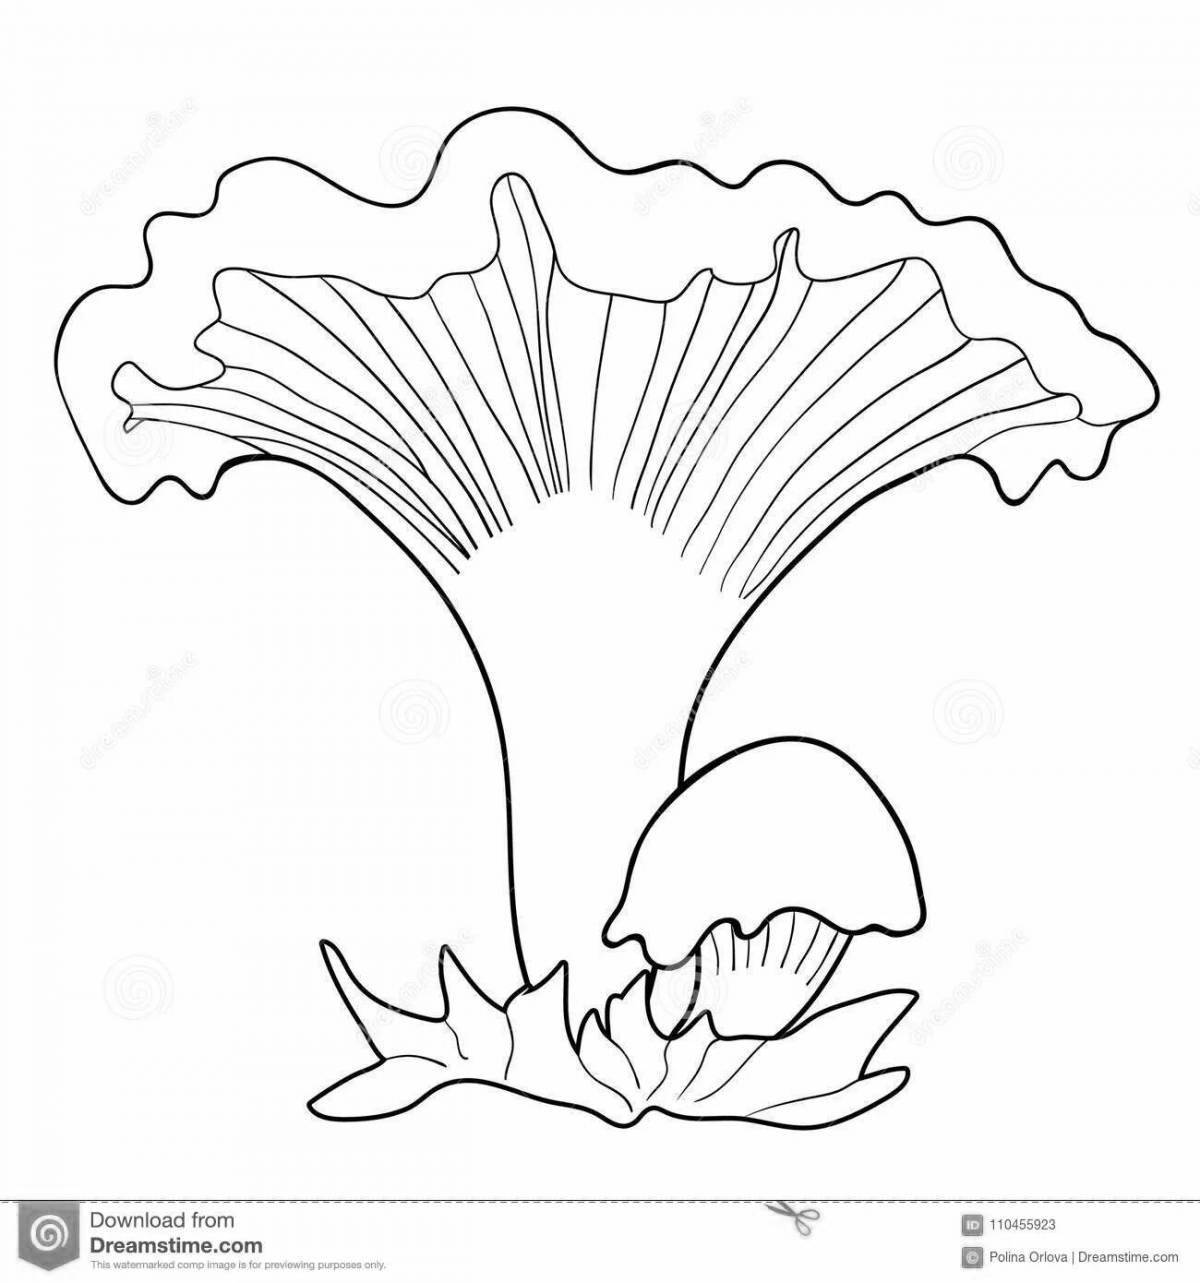 Coloring page amazing chanterelle mushrooms